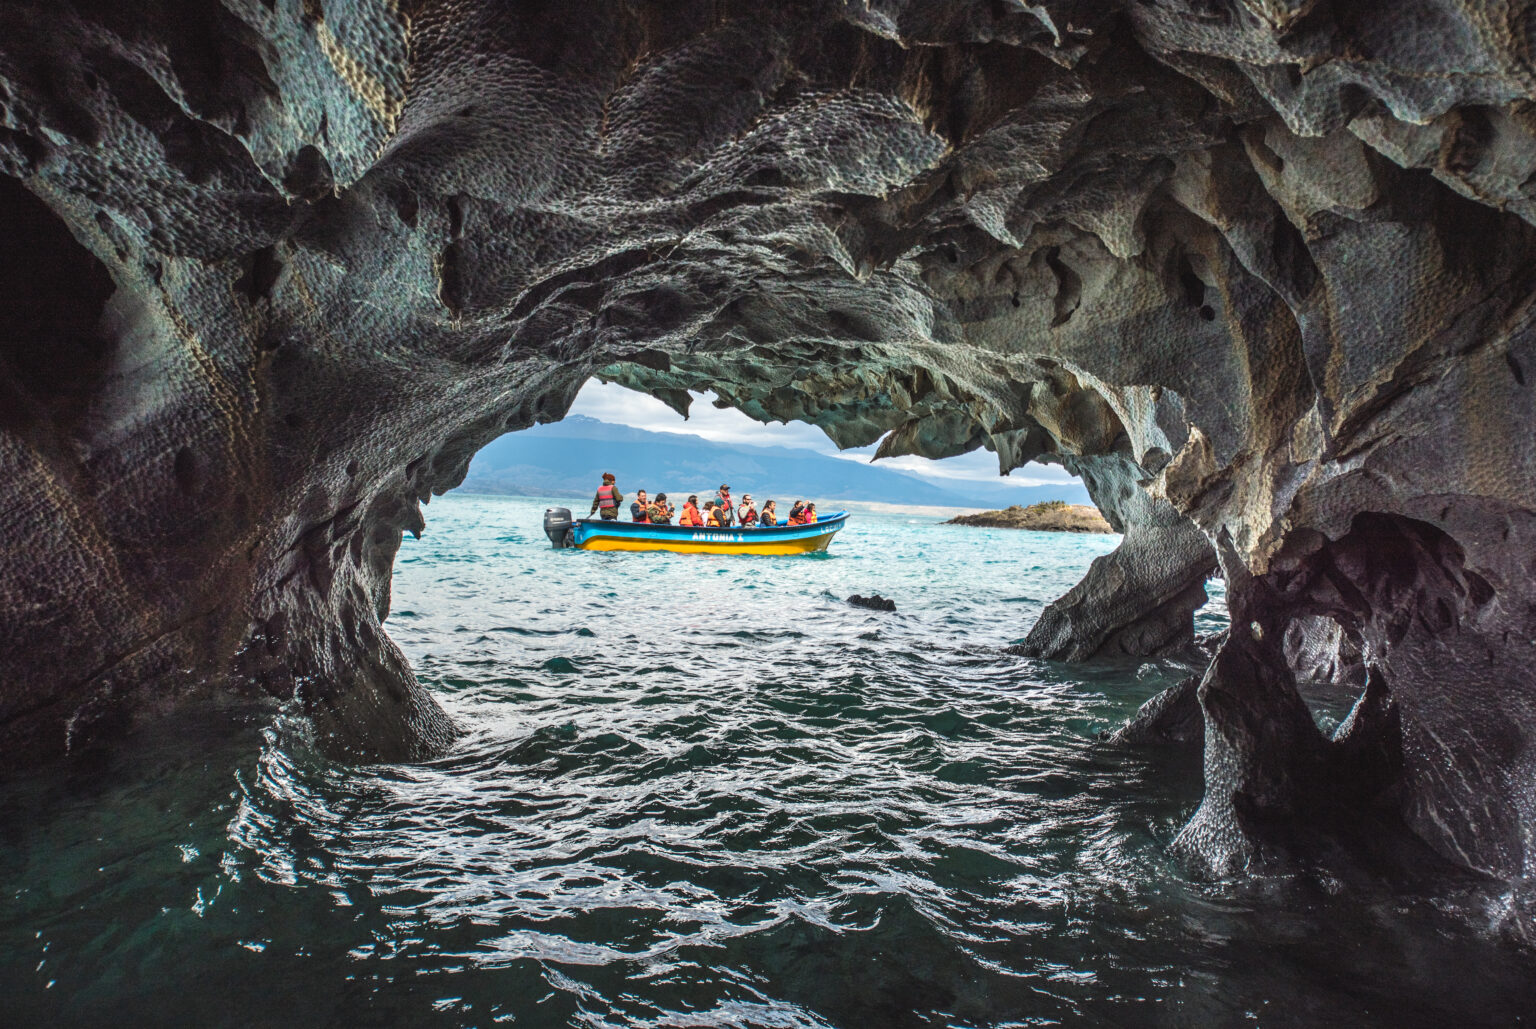 View through the marble caves to a small boat in the water with passengers in orange lifejackets